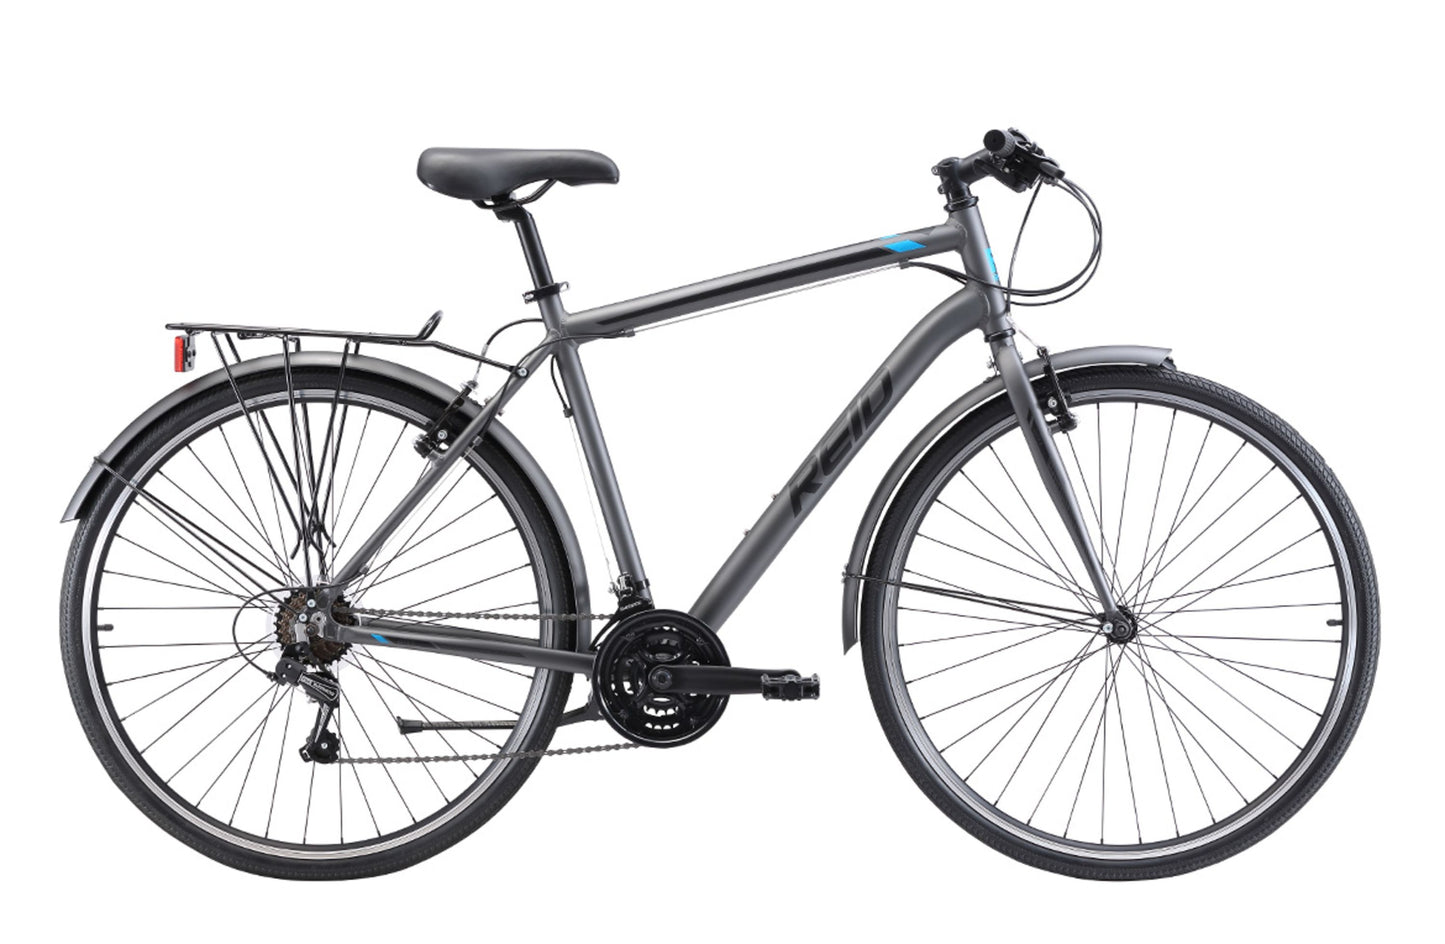 City 1.0 Commuter Bike in Charcoal with Shimano 7-speed gearing from Reid Cycles Australia